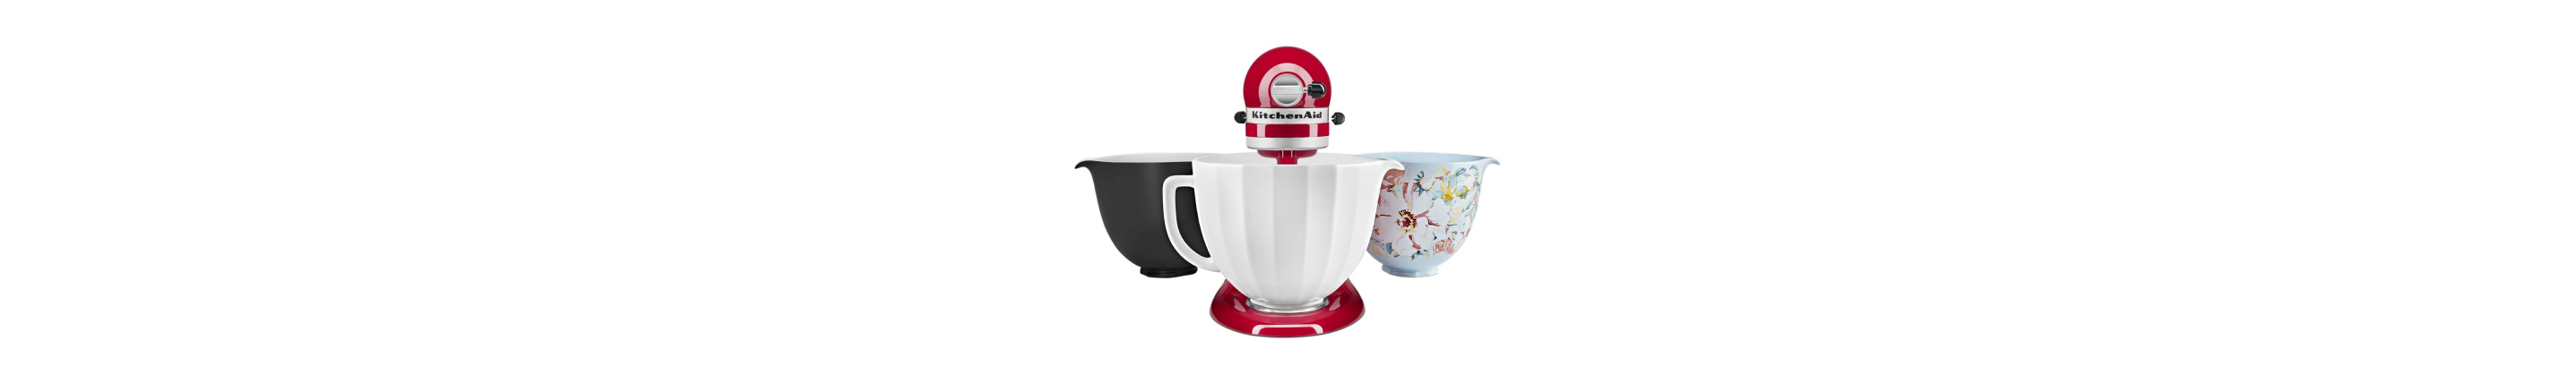 Red stand mixer with three ceramic bowls that are interchangeable